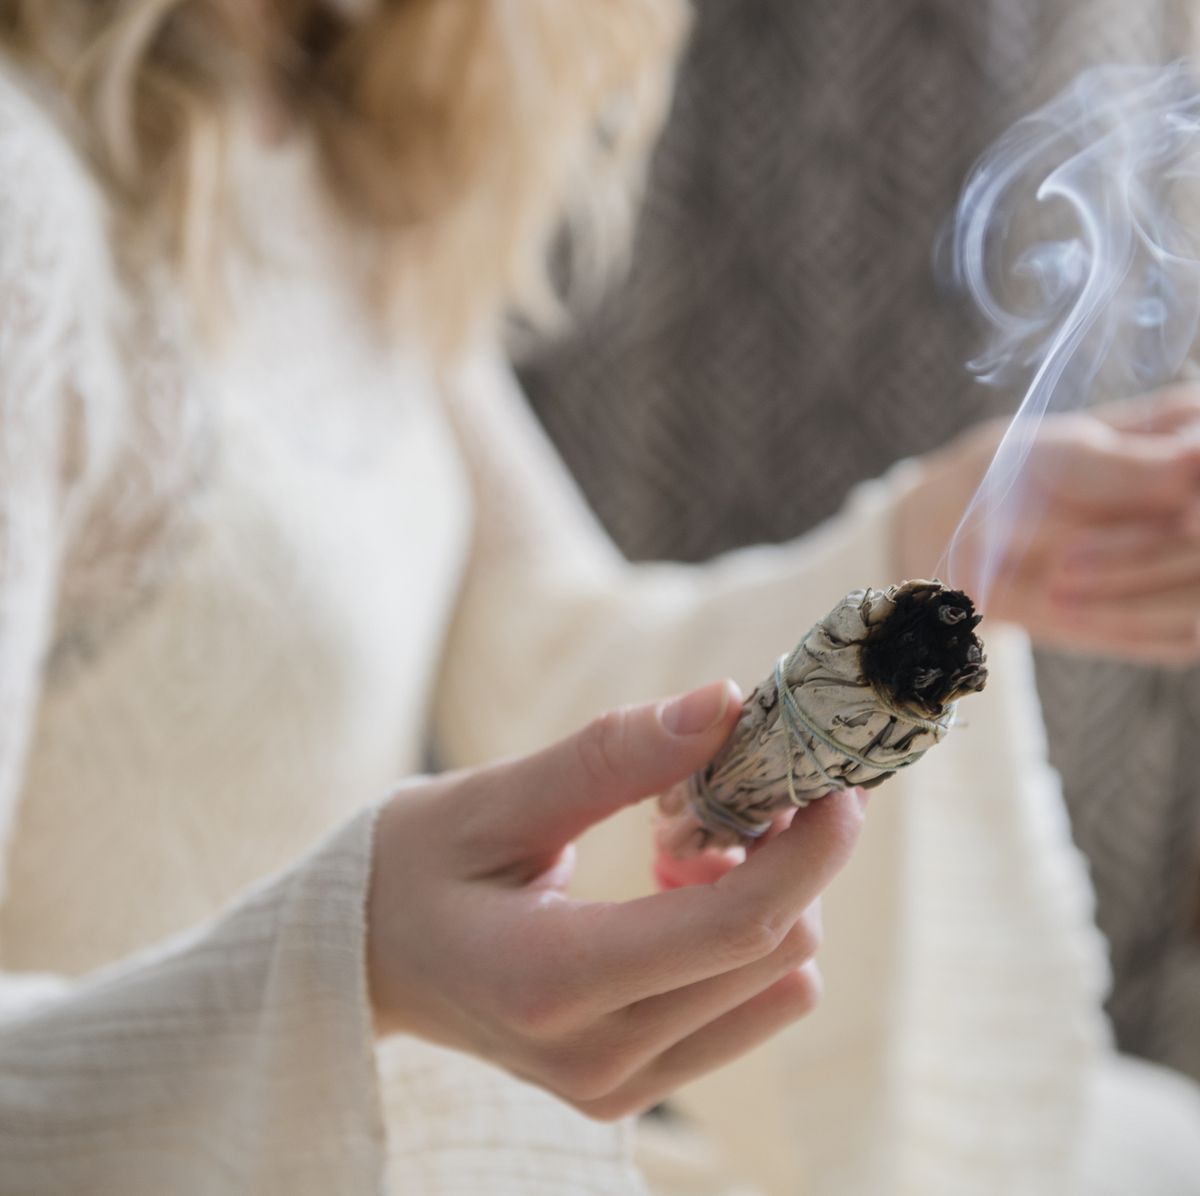 The Top 3 Benefits of Burning Sage — Smudging Benefits